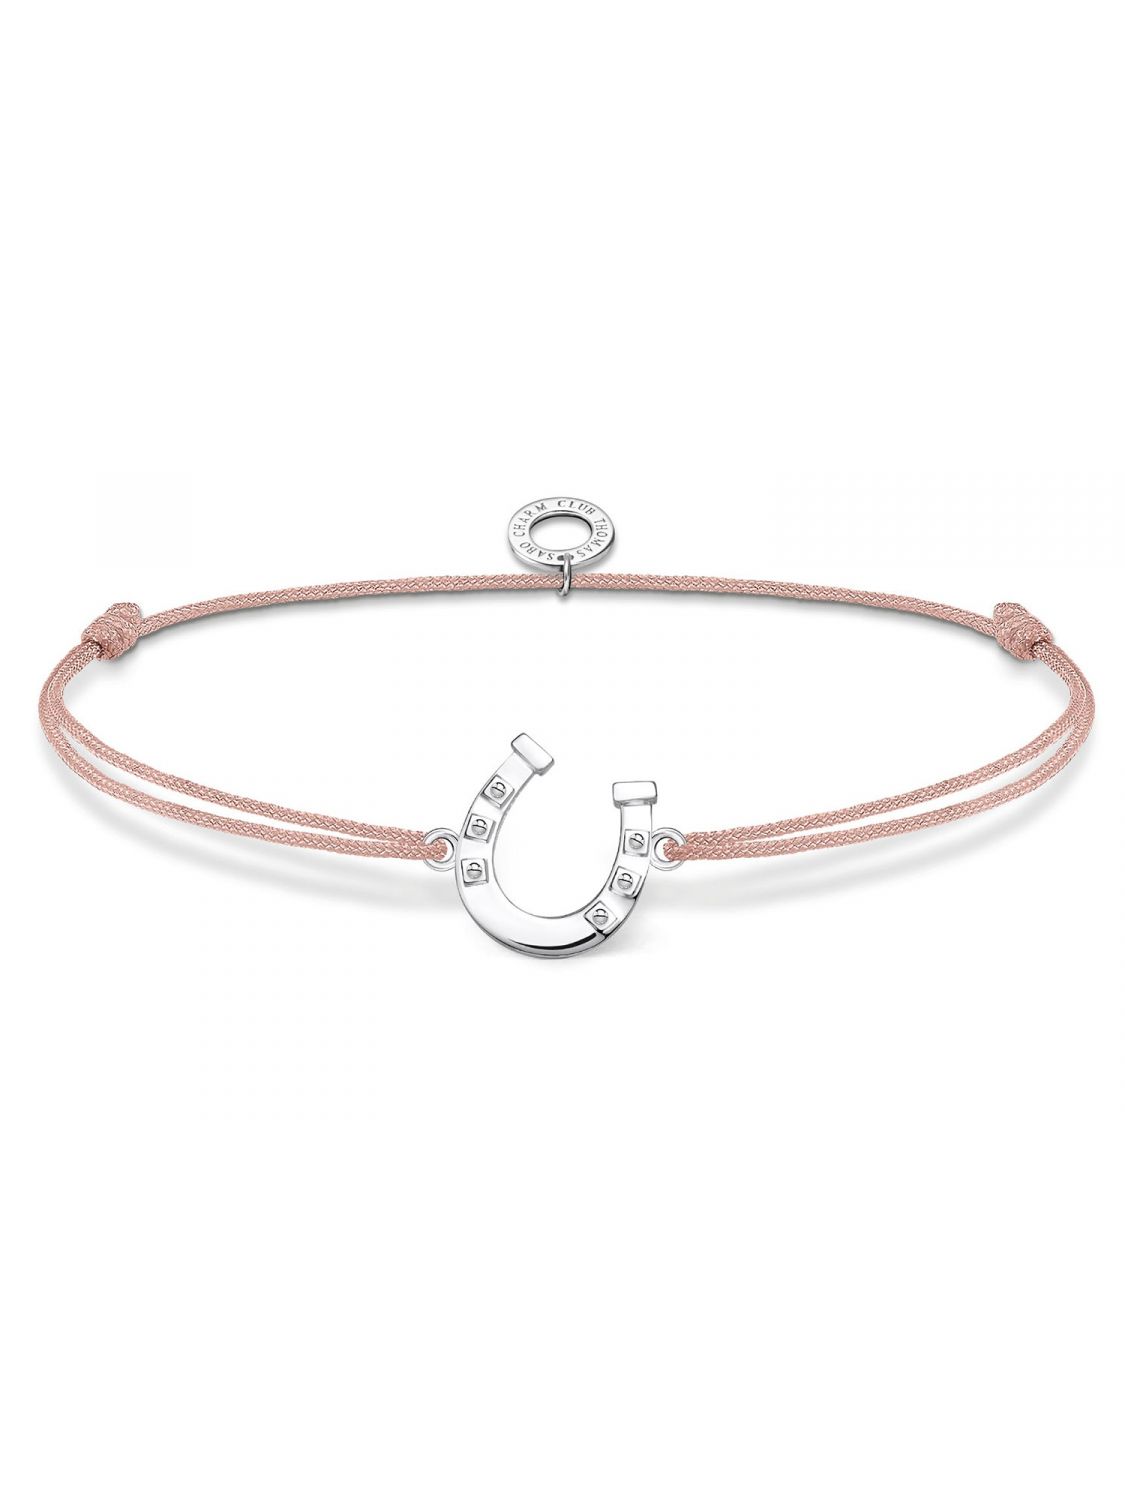 Thomas Sabo Ladies' Bracelet Tree of Love Rose Gold Plated A2041